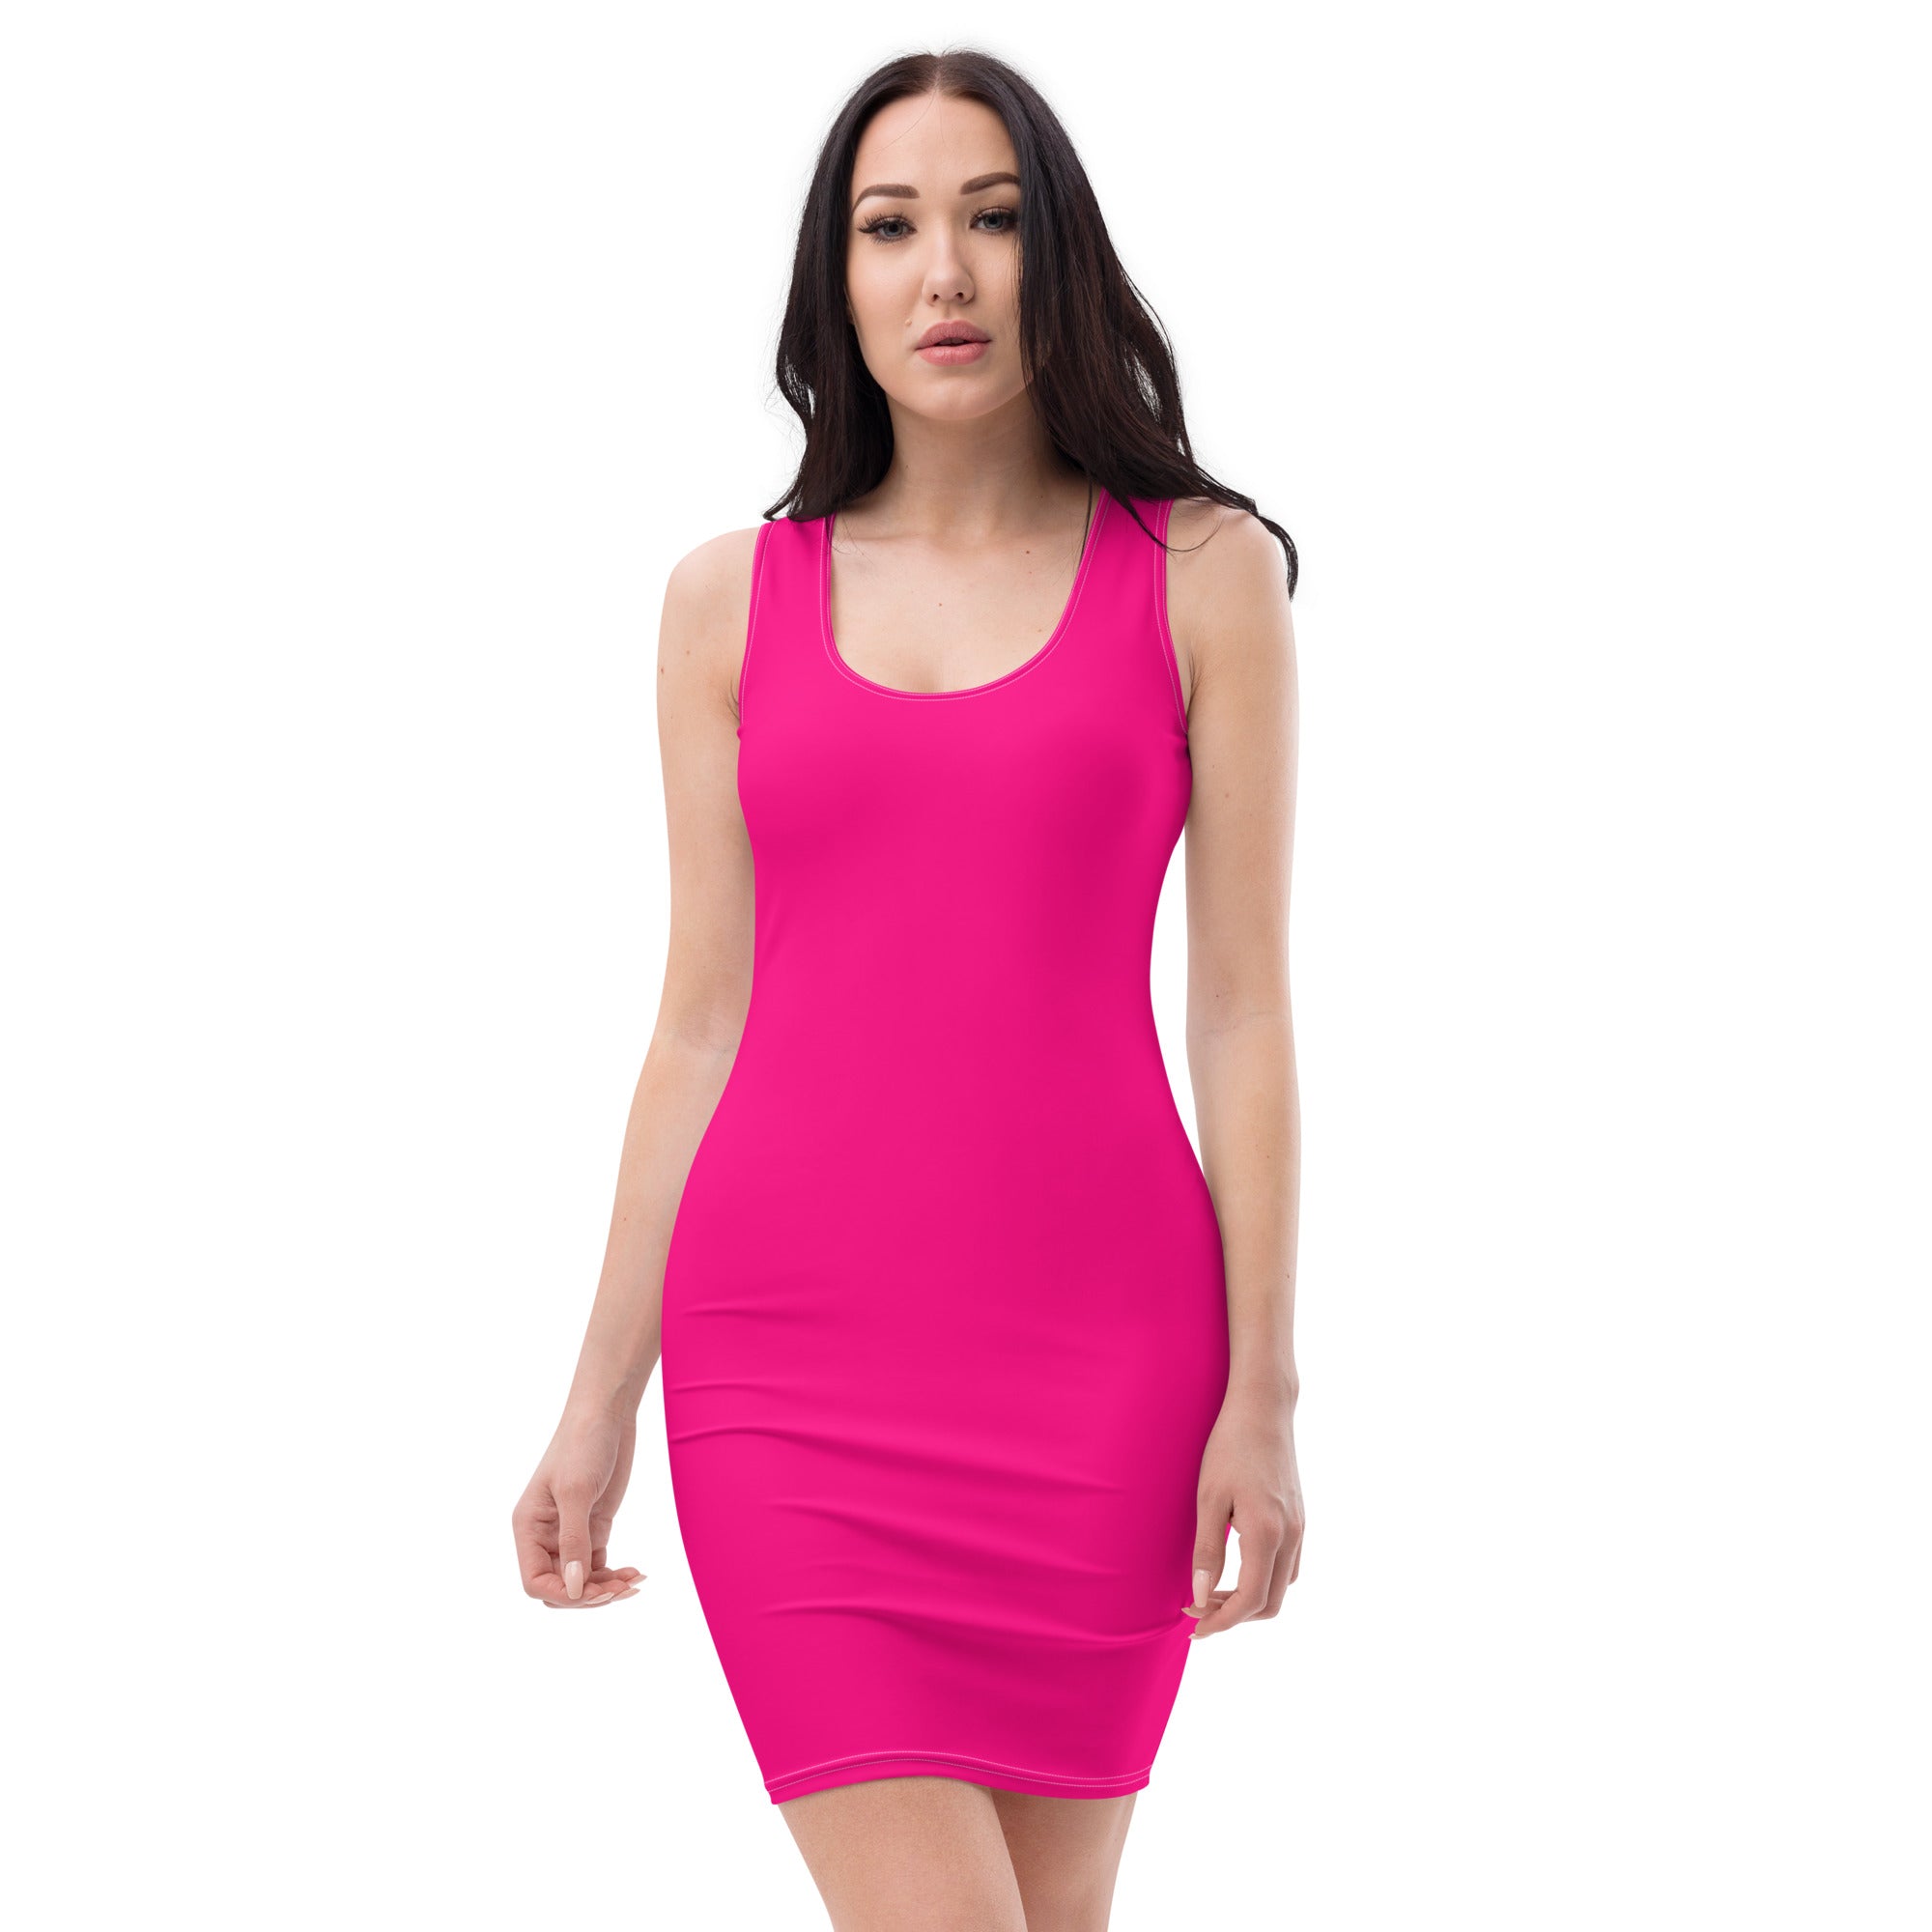 Women’s Solid Summer Fuchsia Fitted Dress, lioness-love